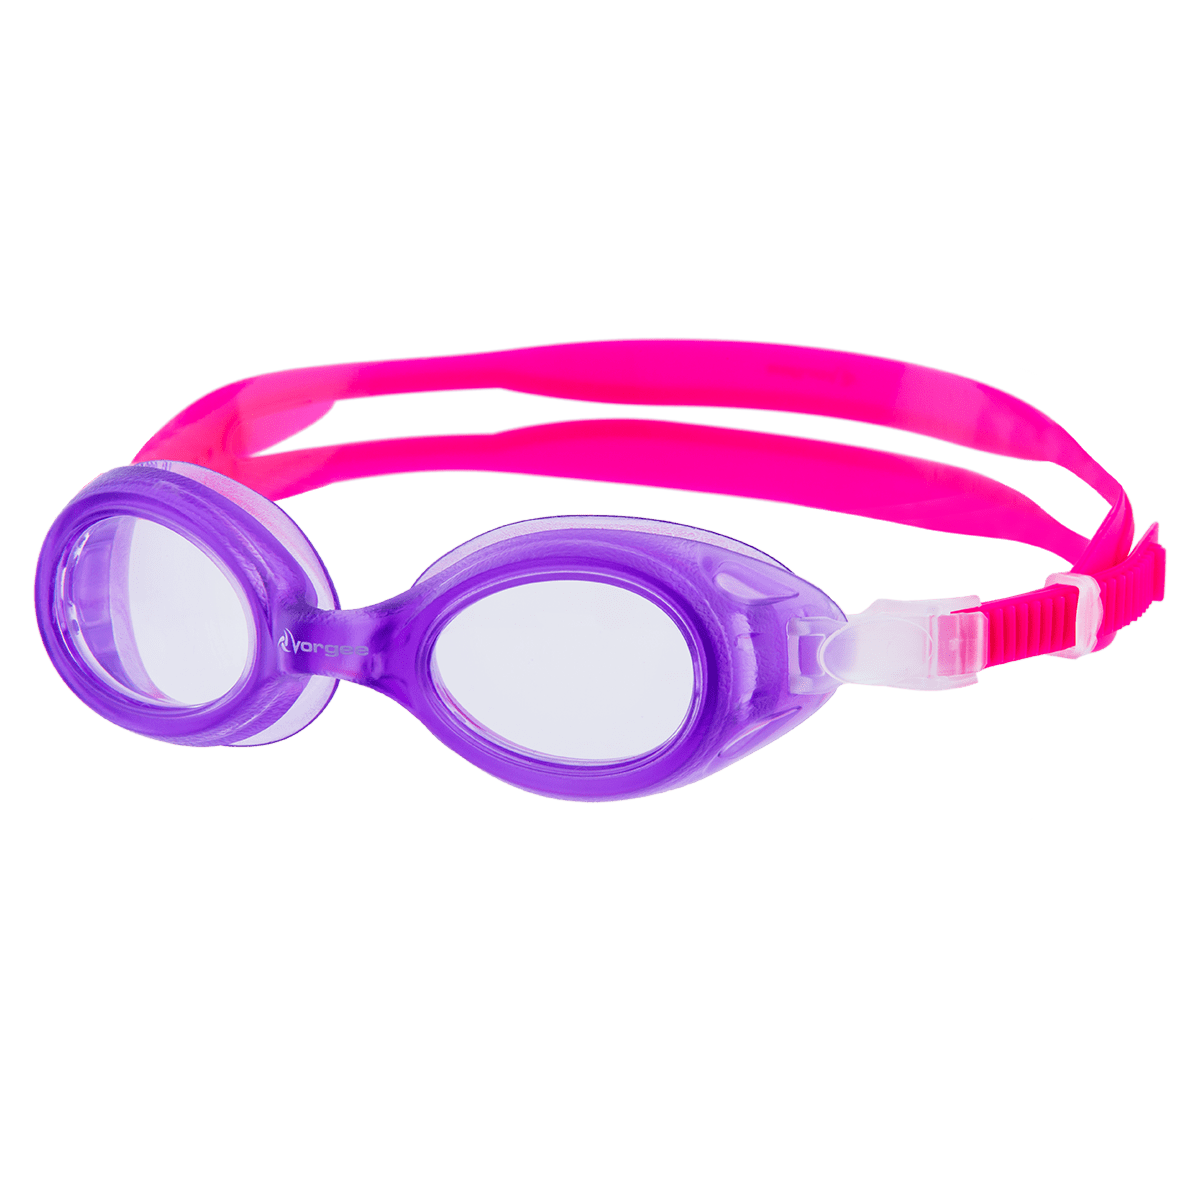 Voyager Junior- Clear Lens Kids Swim Goggle (4 to 12 years) by Vorgee - Ocean Junction